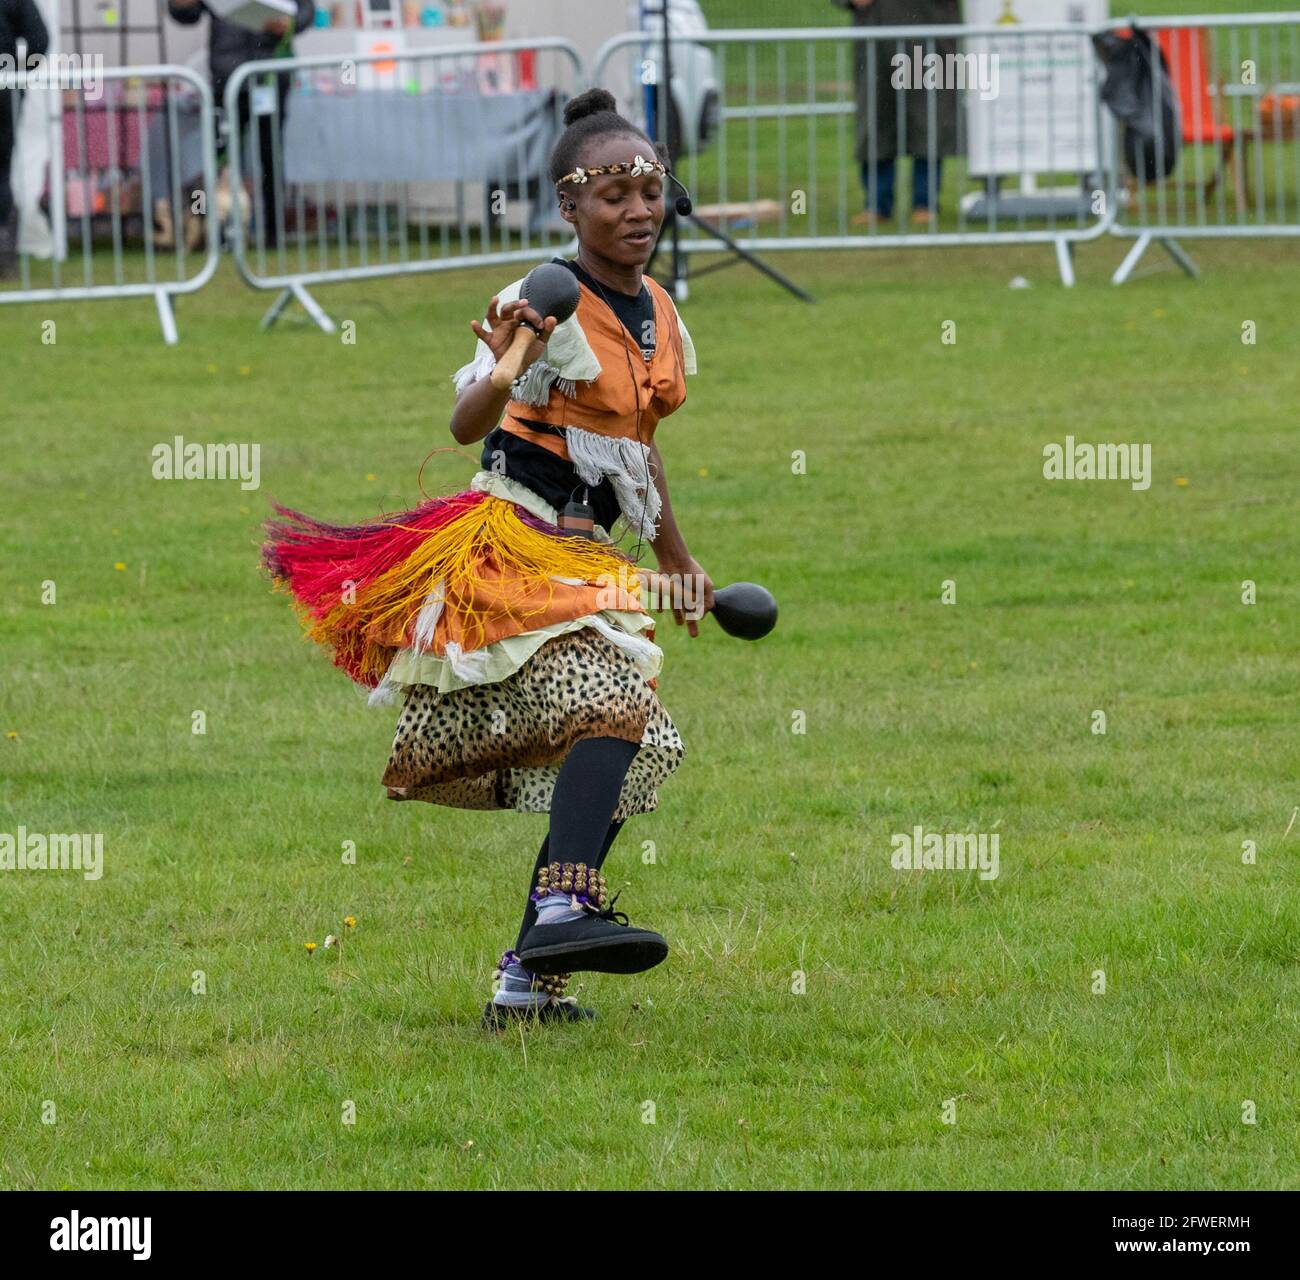 Brentwood Essex 22. Mai 2021 The Weald Park Country Show, Weald Festival of Dogs, Weald Festival of Cars, Weald Country Park, Brentwood Essex, African Dancing Display, Credit: Ian Davidson/Alamy Live News Stockfoto